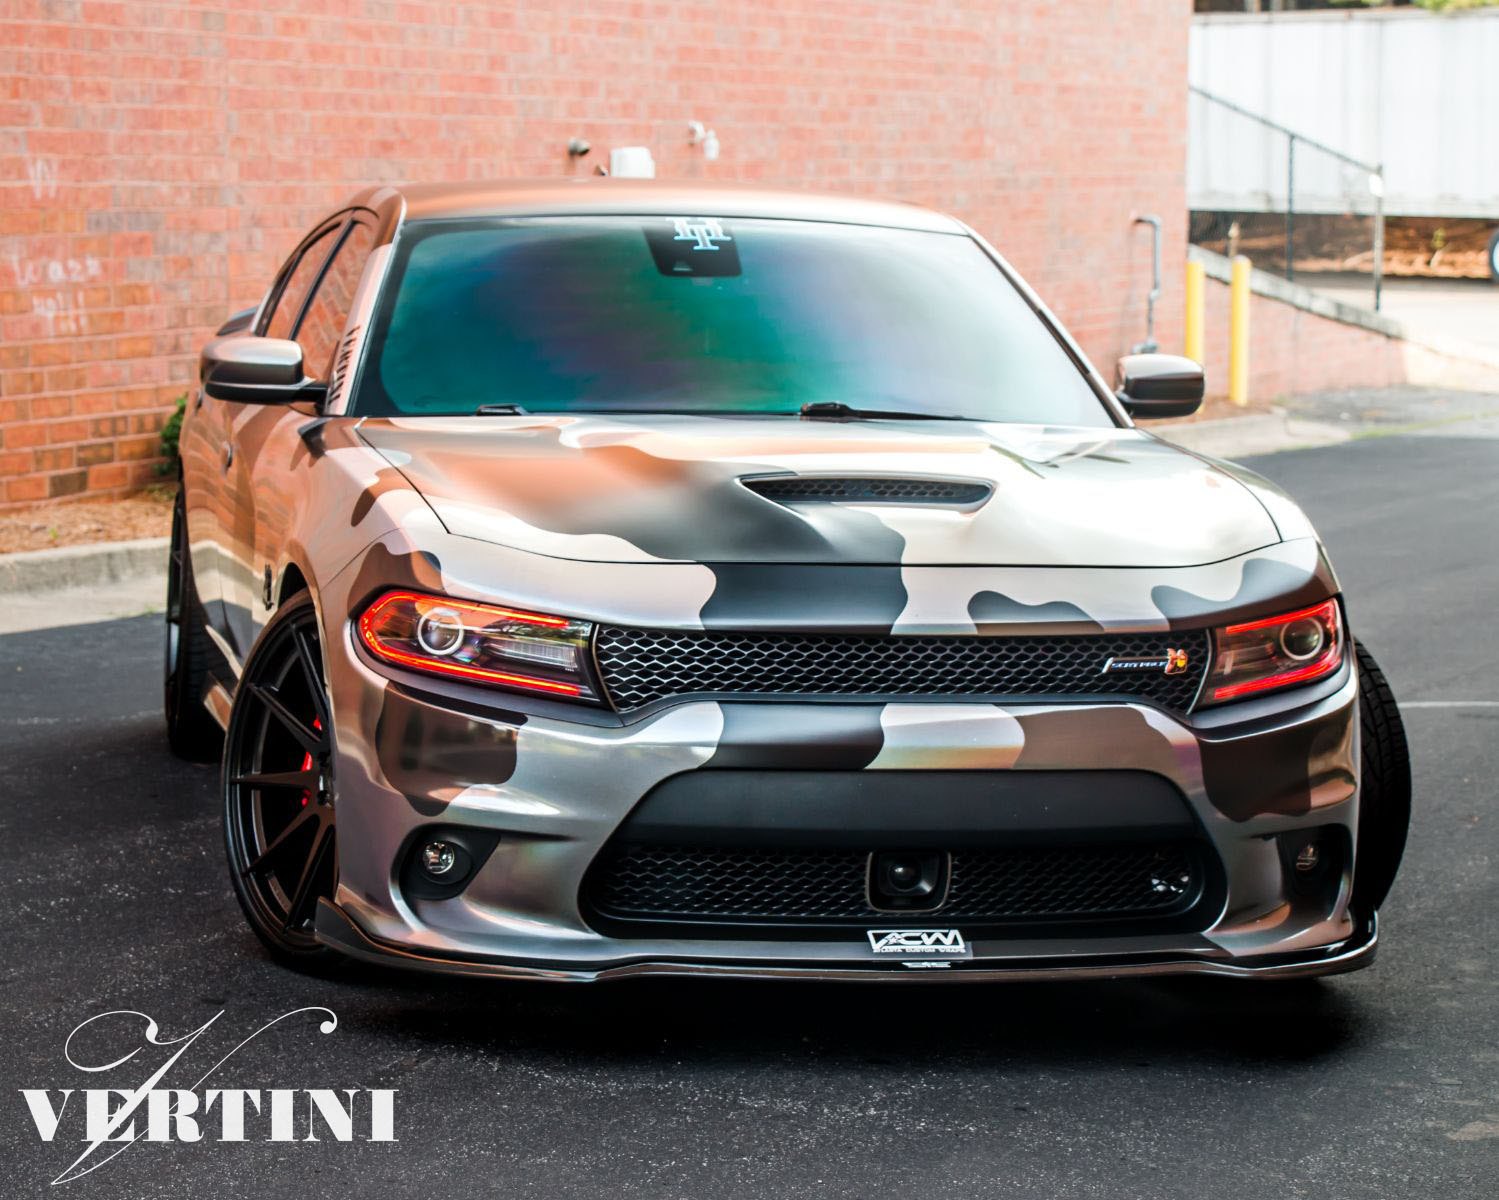 Color LED-Bar Headlights on Camo Dodge Charger - Photo by Vertini Wheels